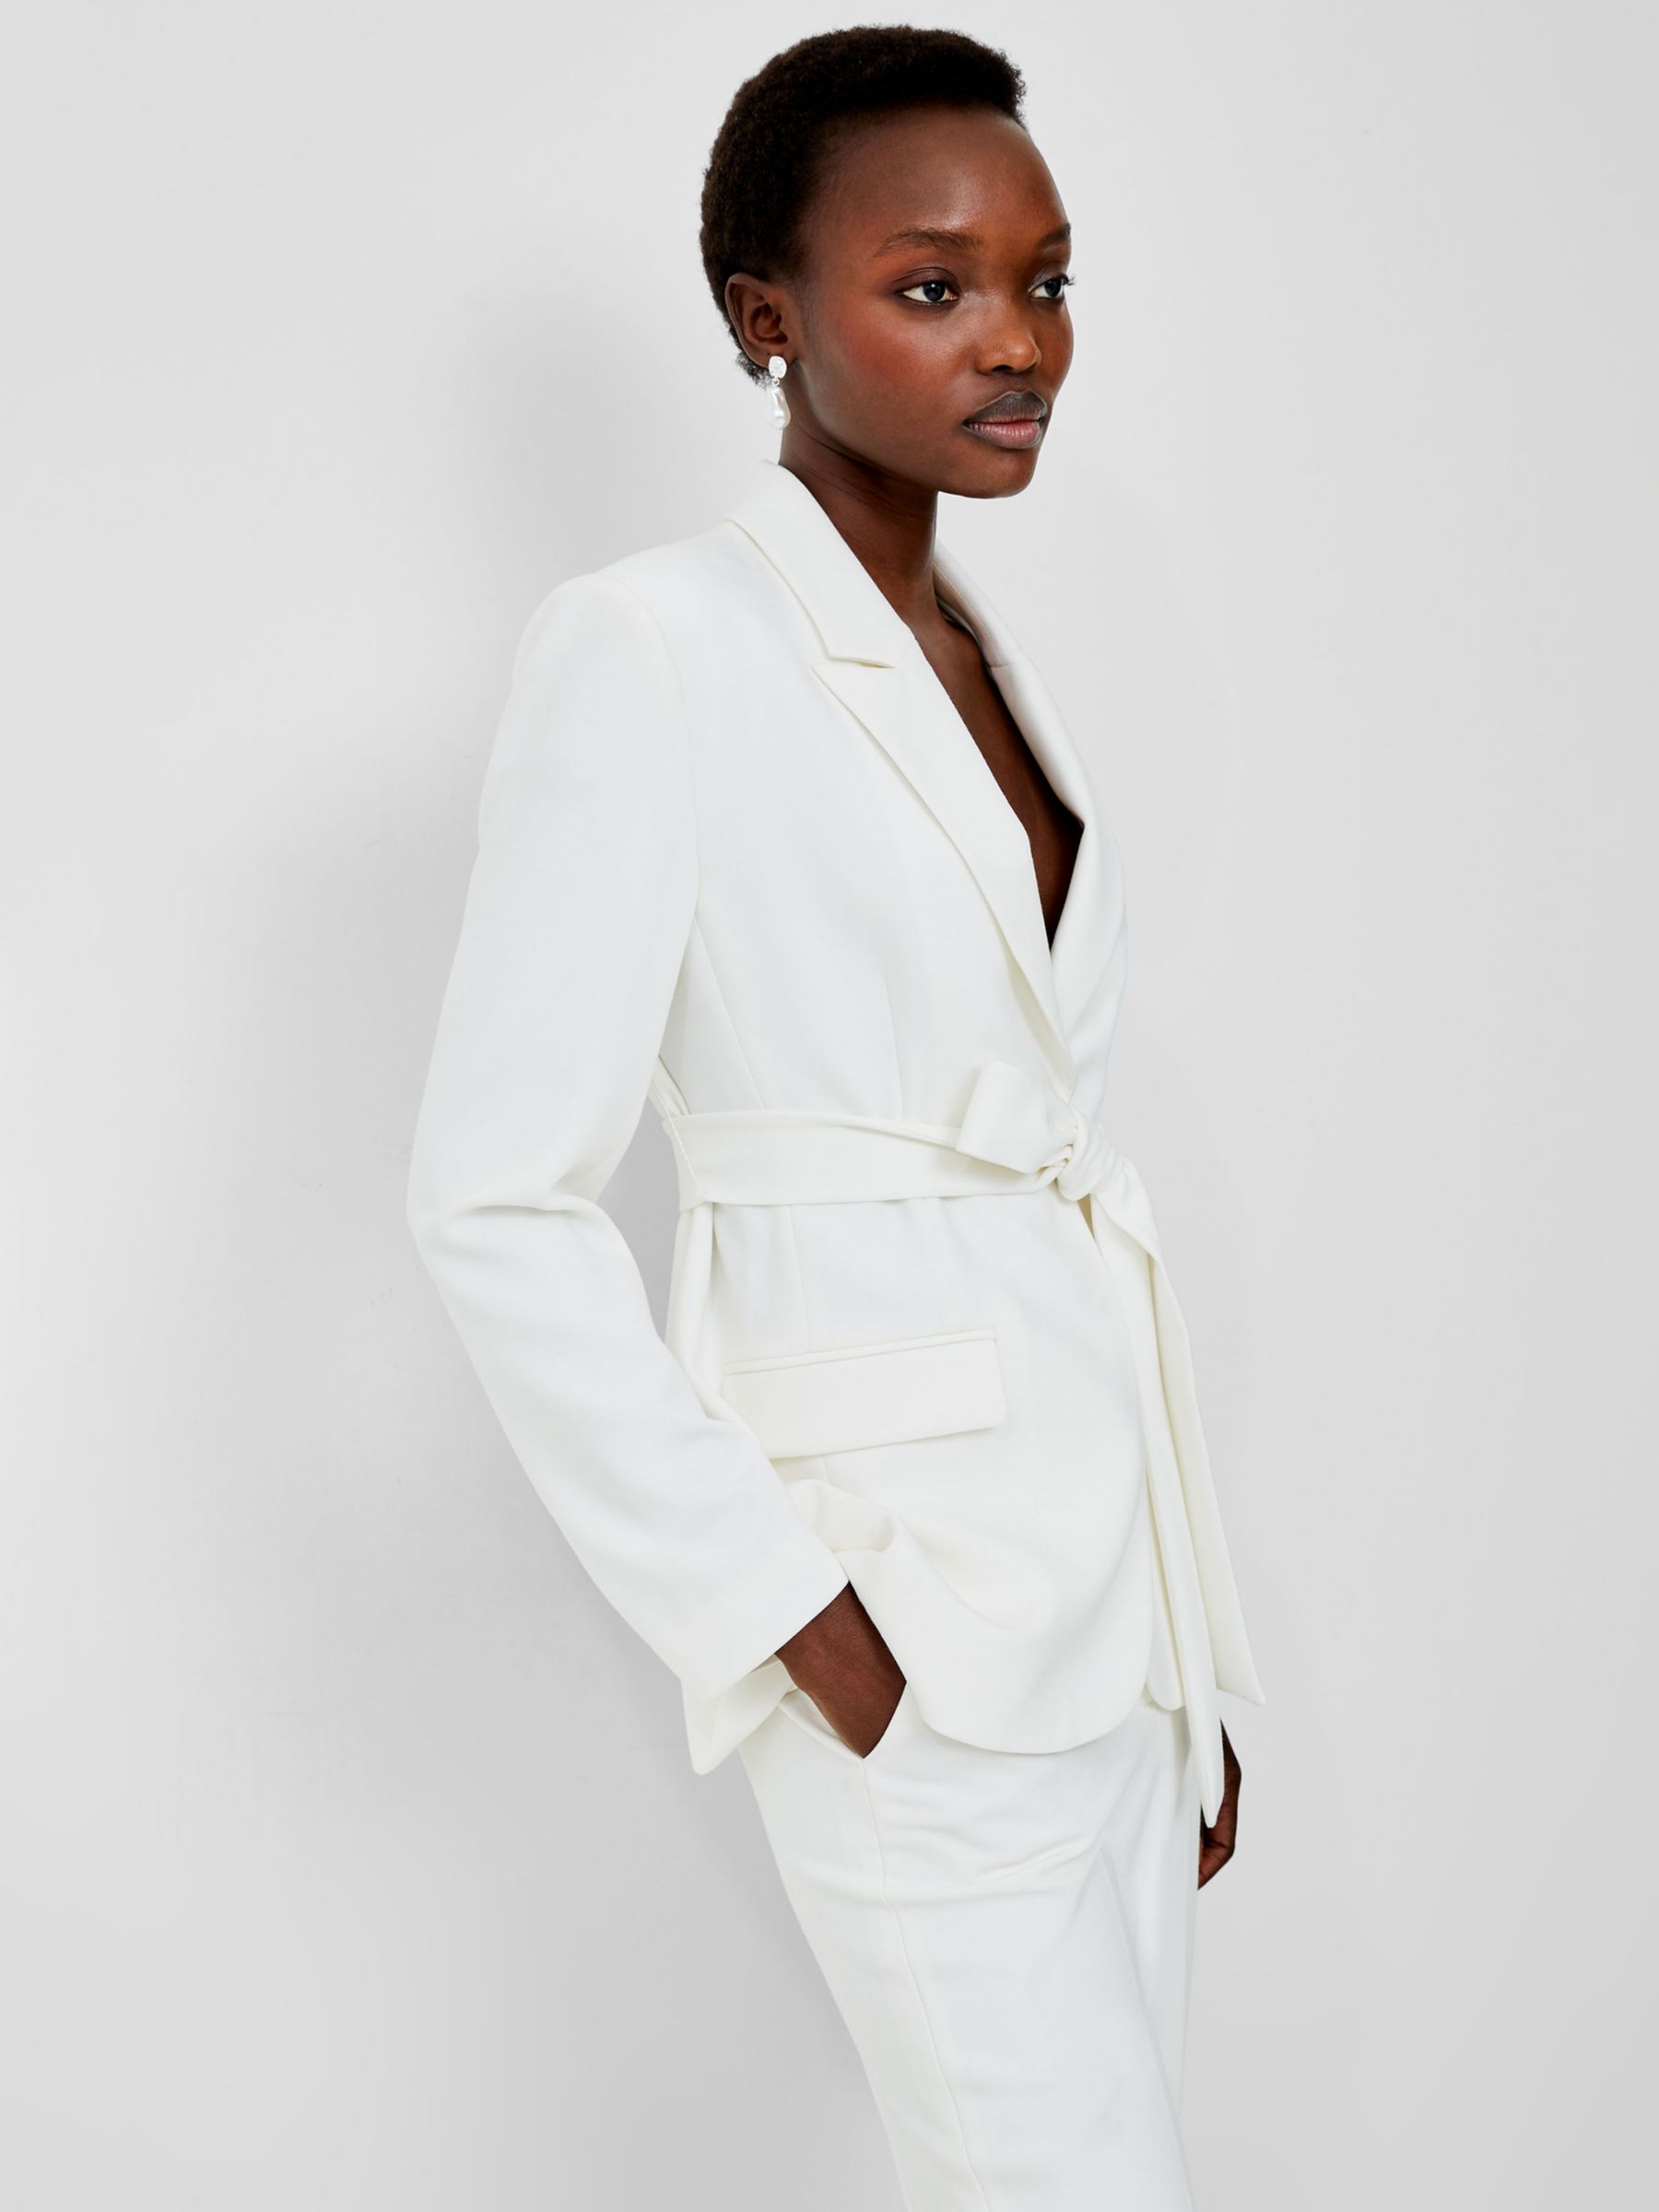 Buy French Connection Whisper Belted Blazer, Summer White Online at johnlewis.com